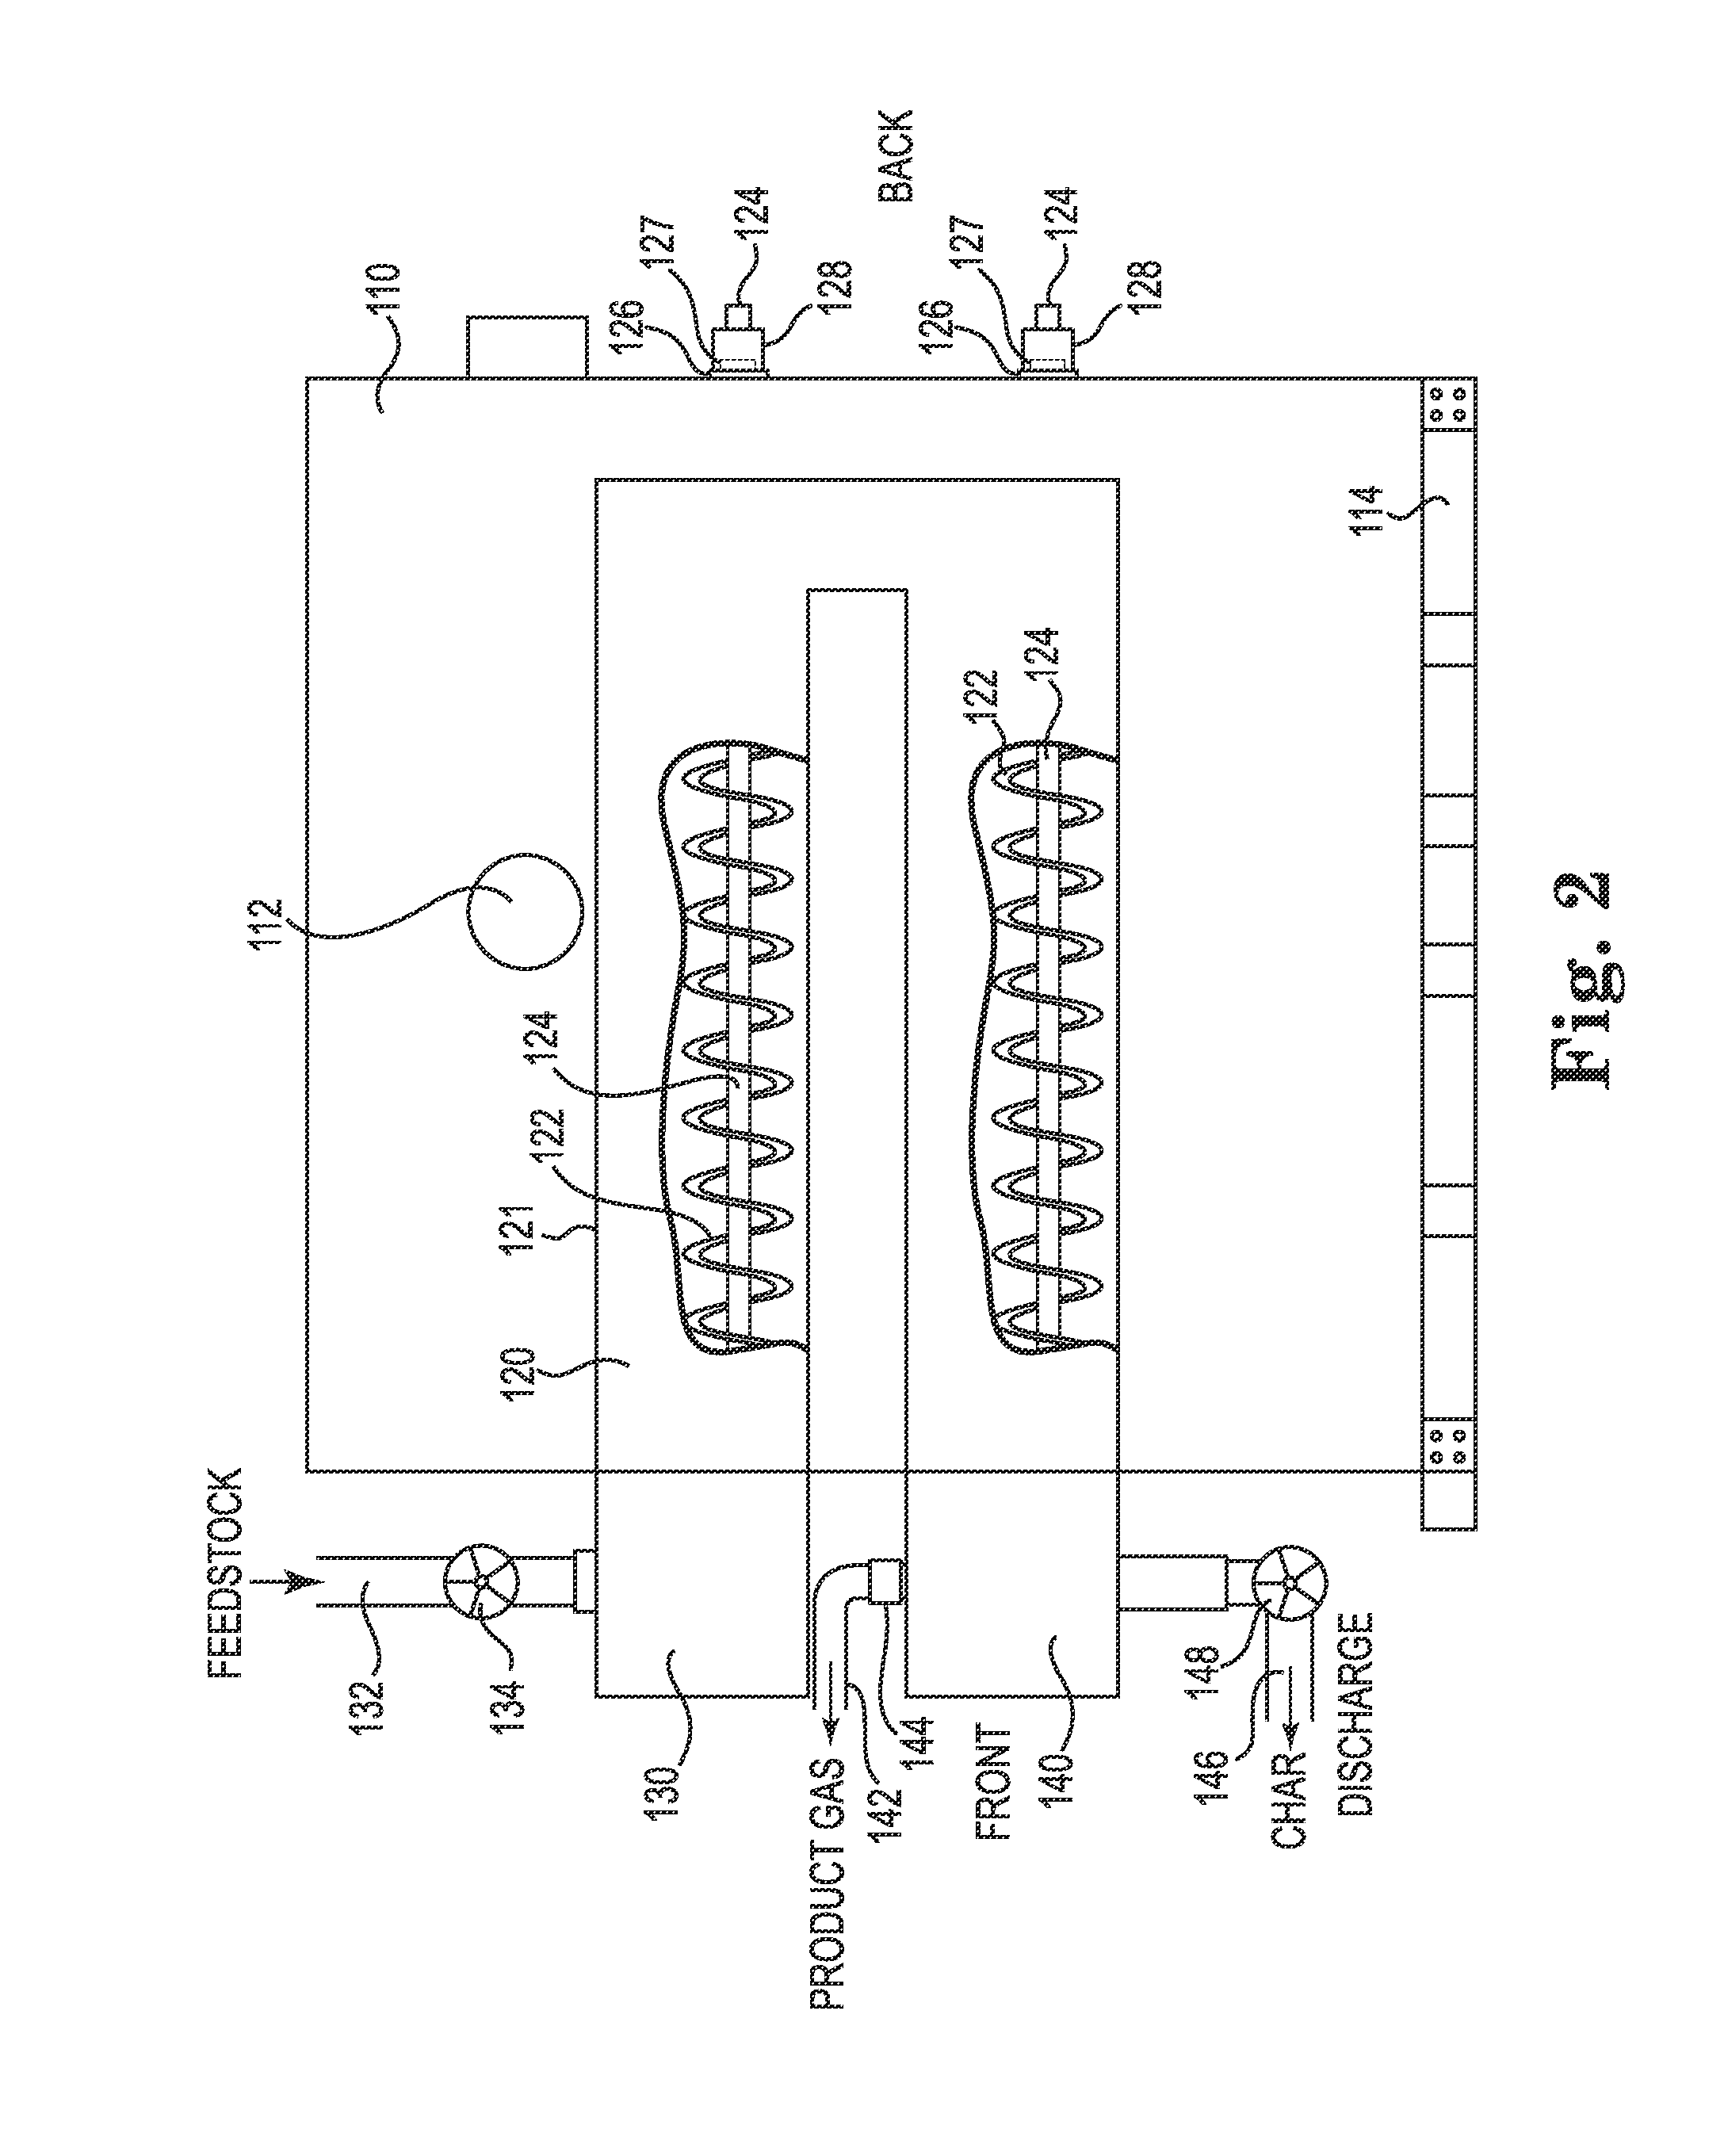 System and Method Using a Horizontal Sublimation Chamber for Production of Fuel From a Carbon-Containing Feedstock